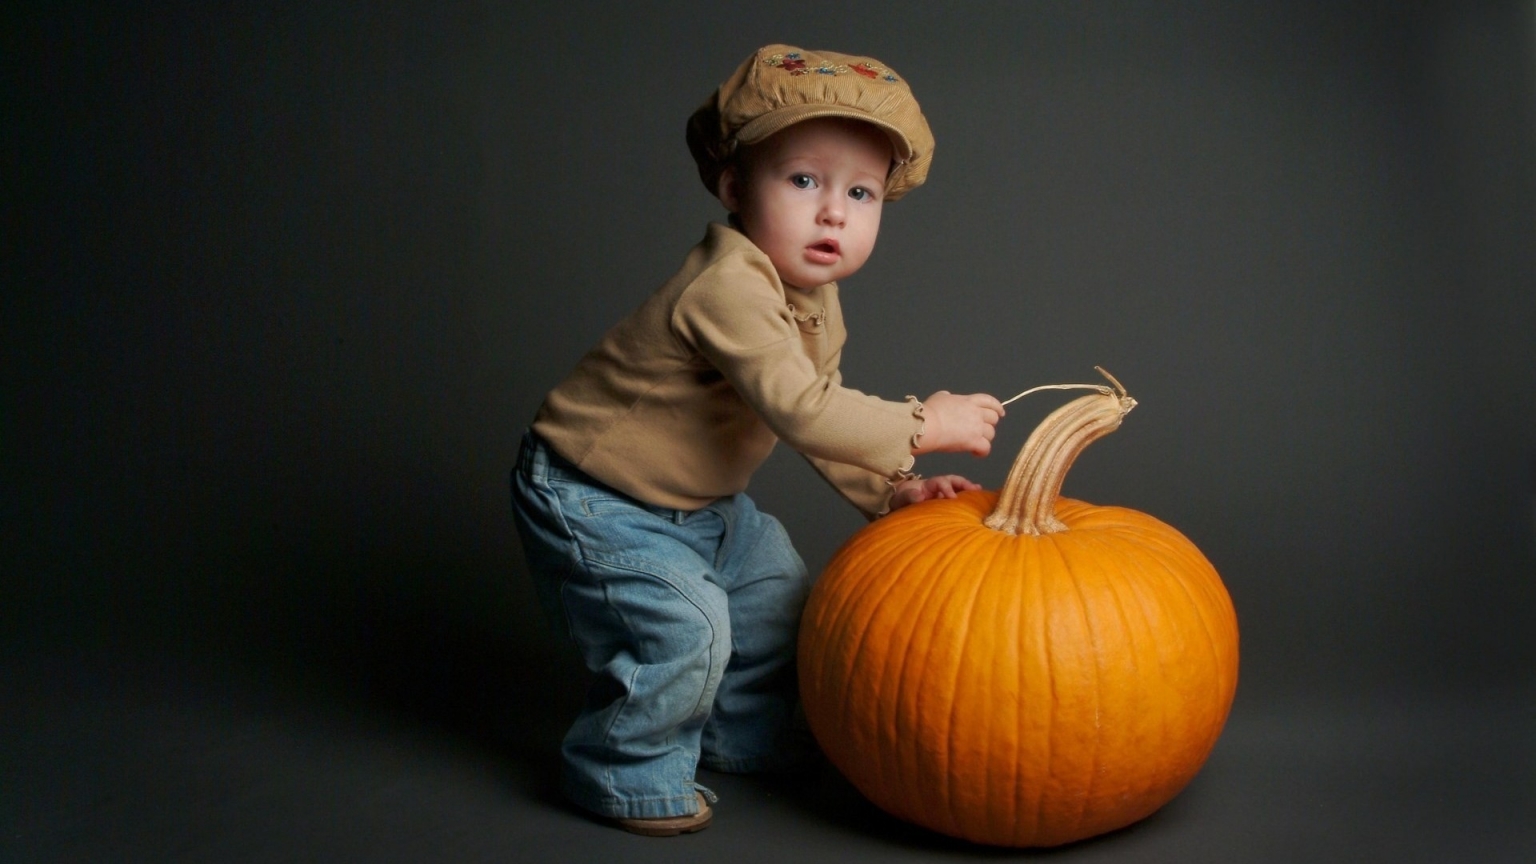 The Boy with Pumpkin for 1536 x 864 HDTV resolution